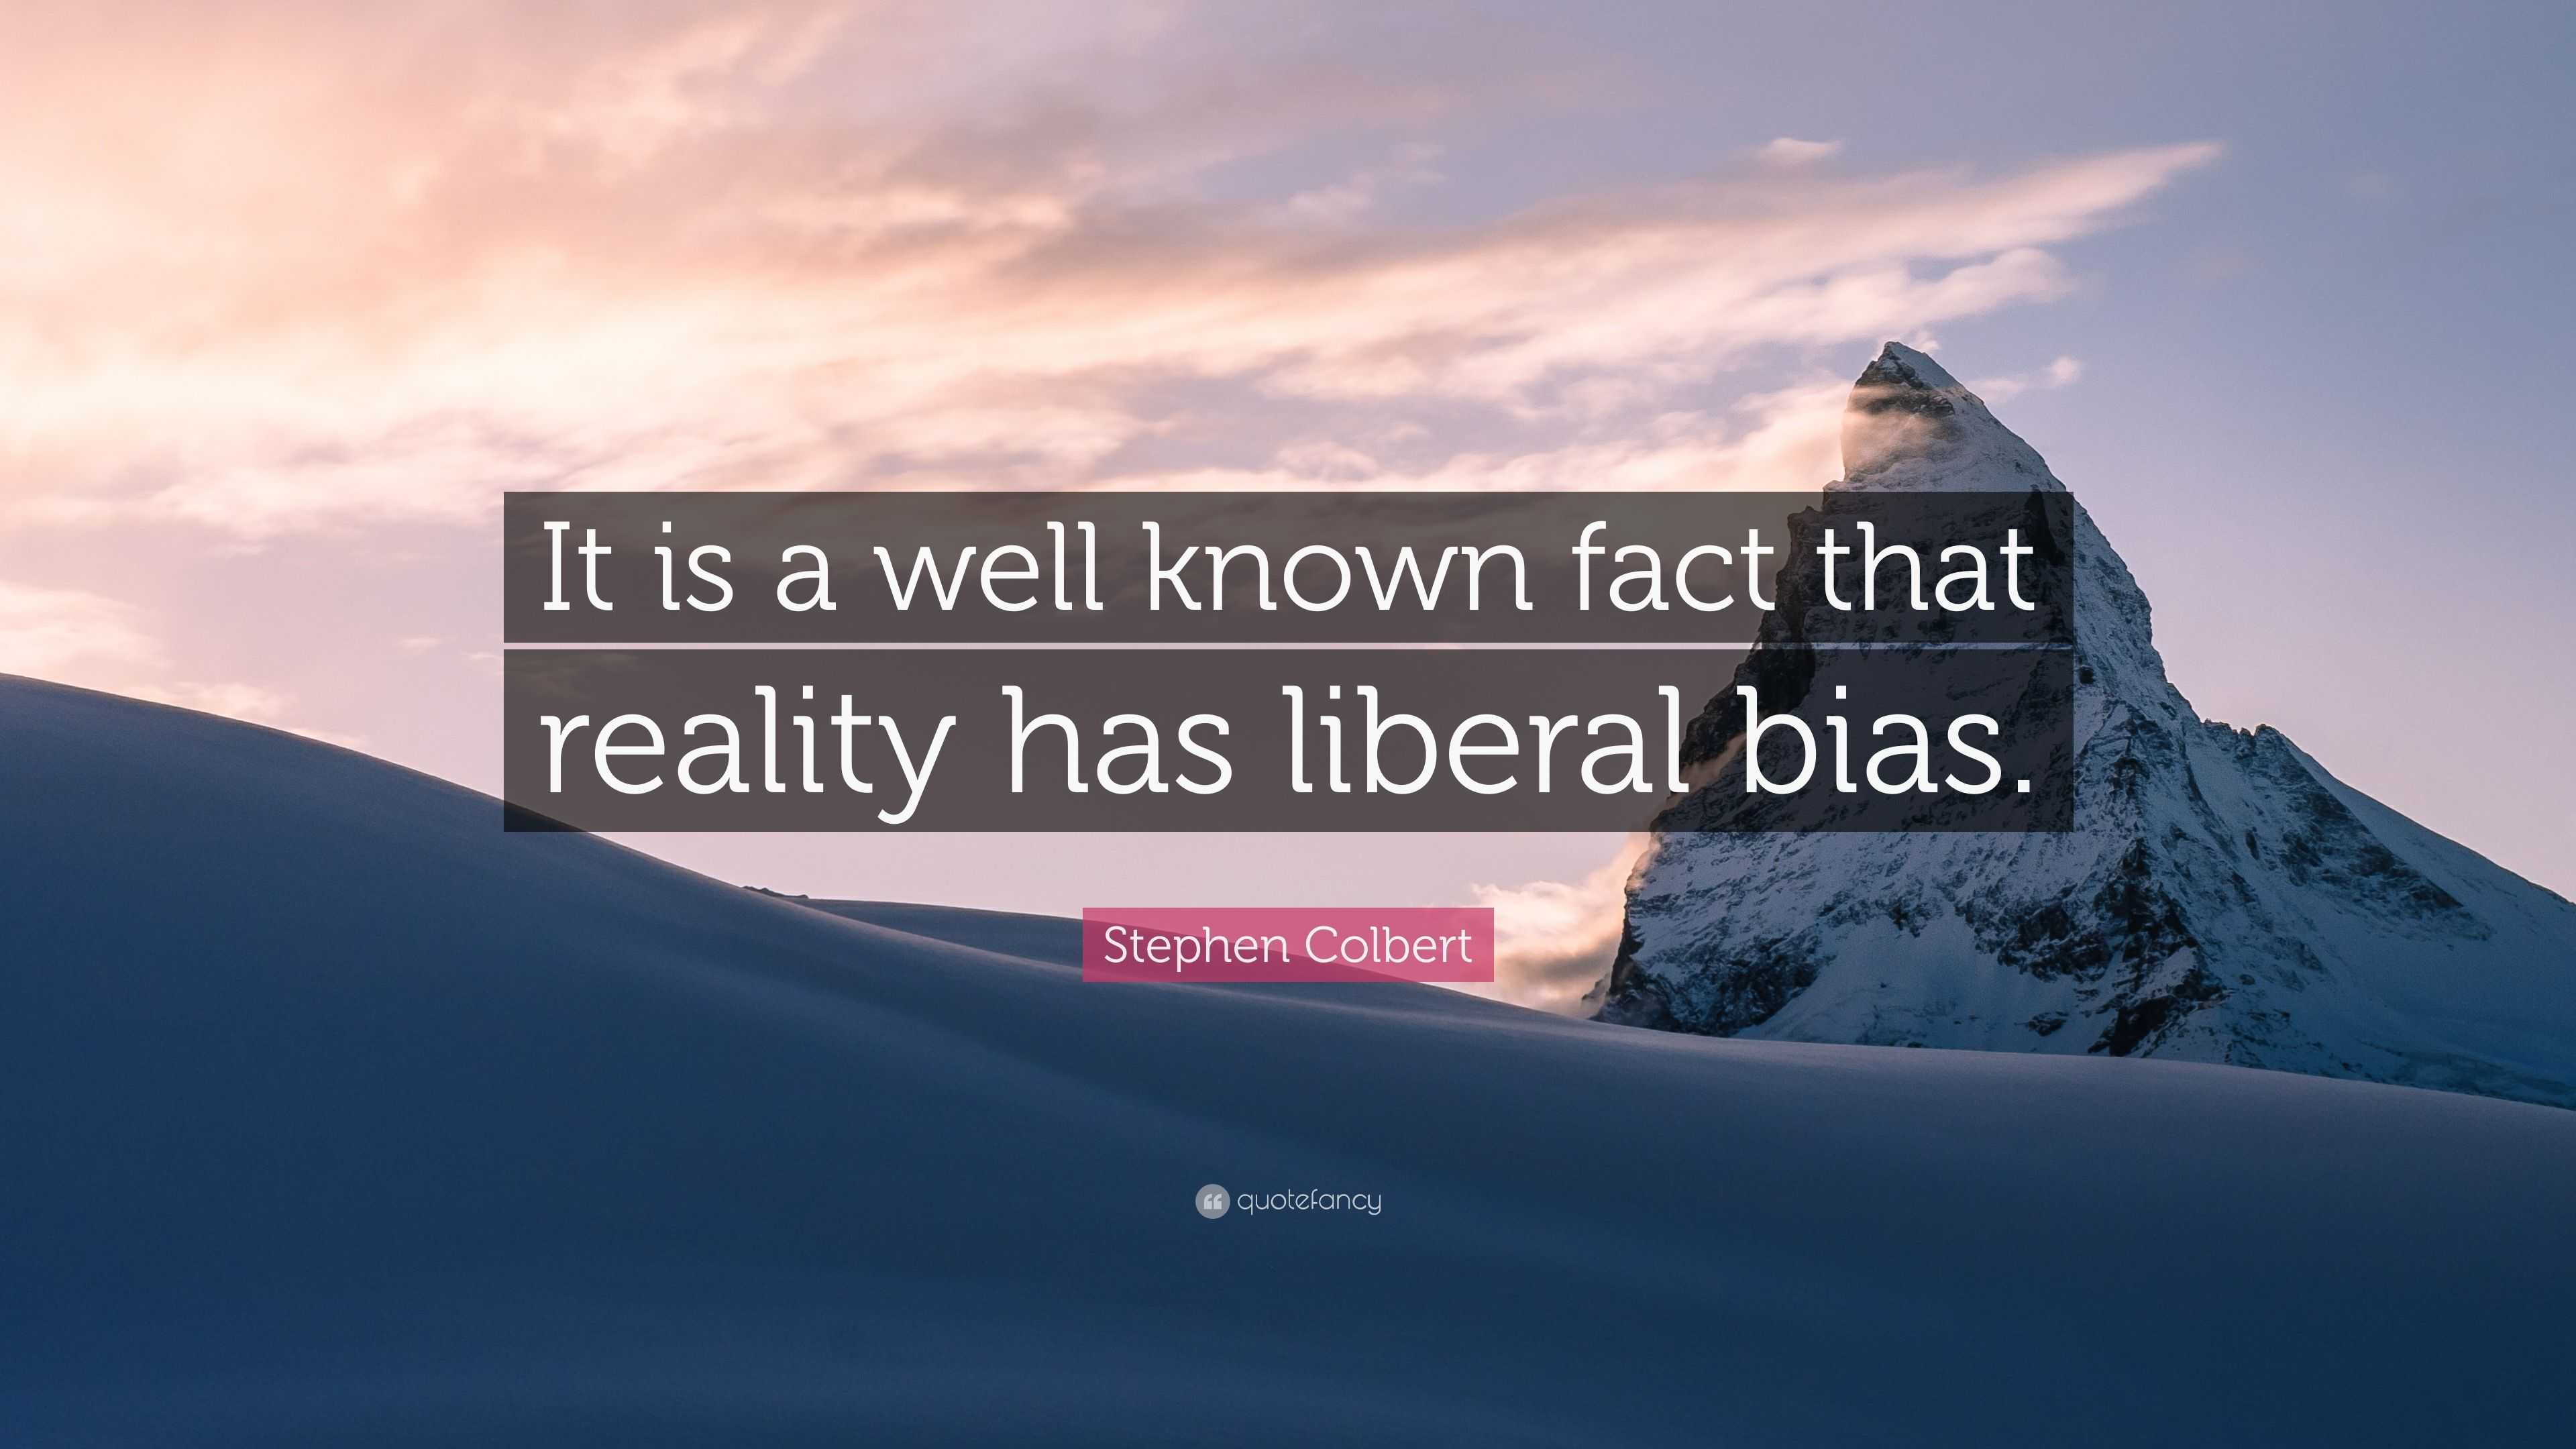 Stephen Colbert Quote “it Is A Well Known Fact That Reality Has Liberal Bias ”